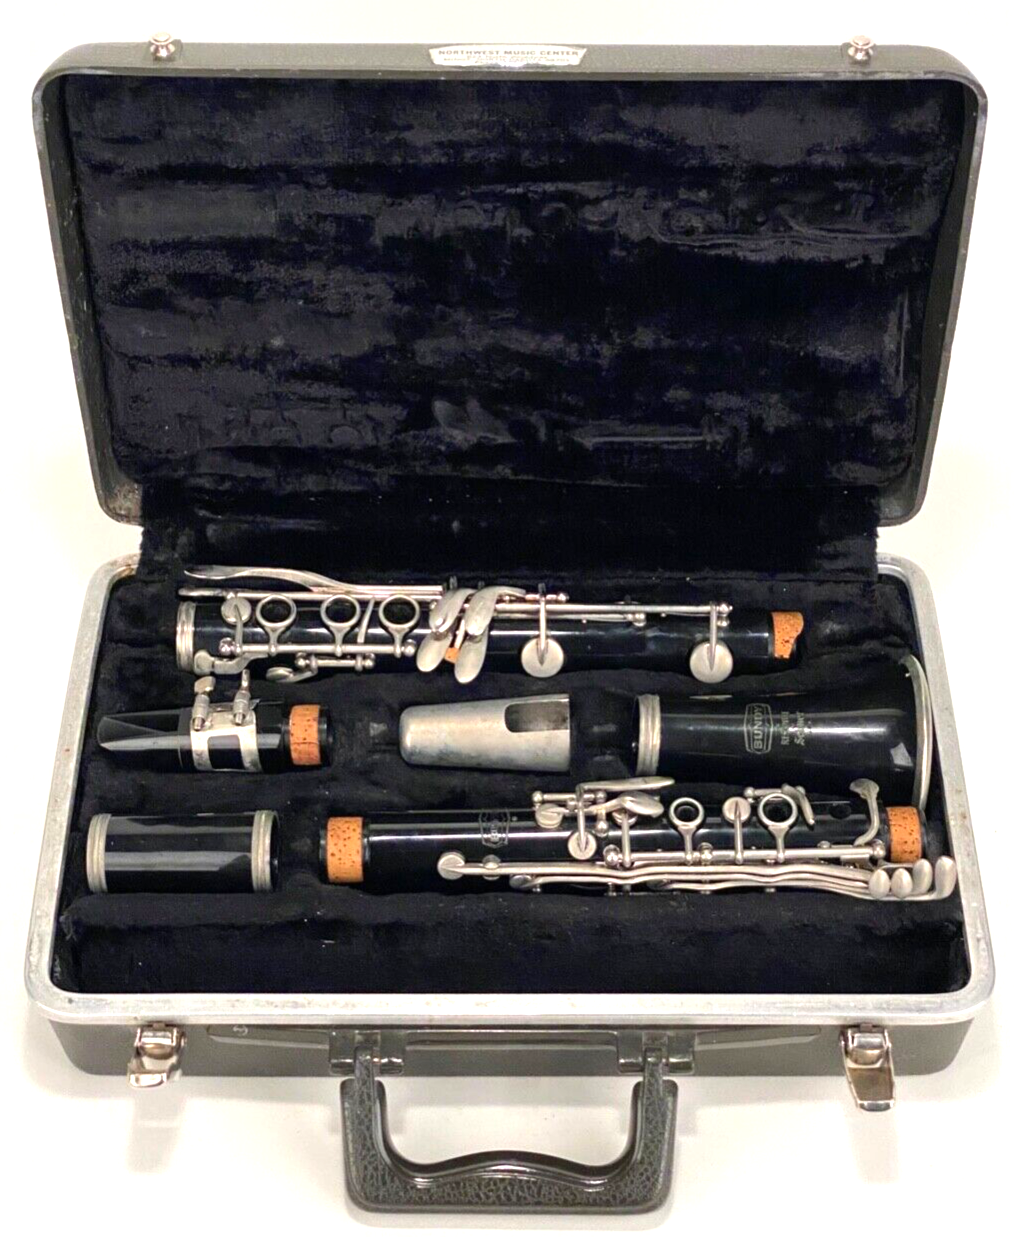 Primary image for Bundy Resonite the Selmer Co Clarinet w/Hard Case-Serial # 849075 - Vintage 1980